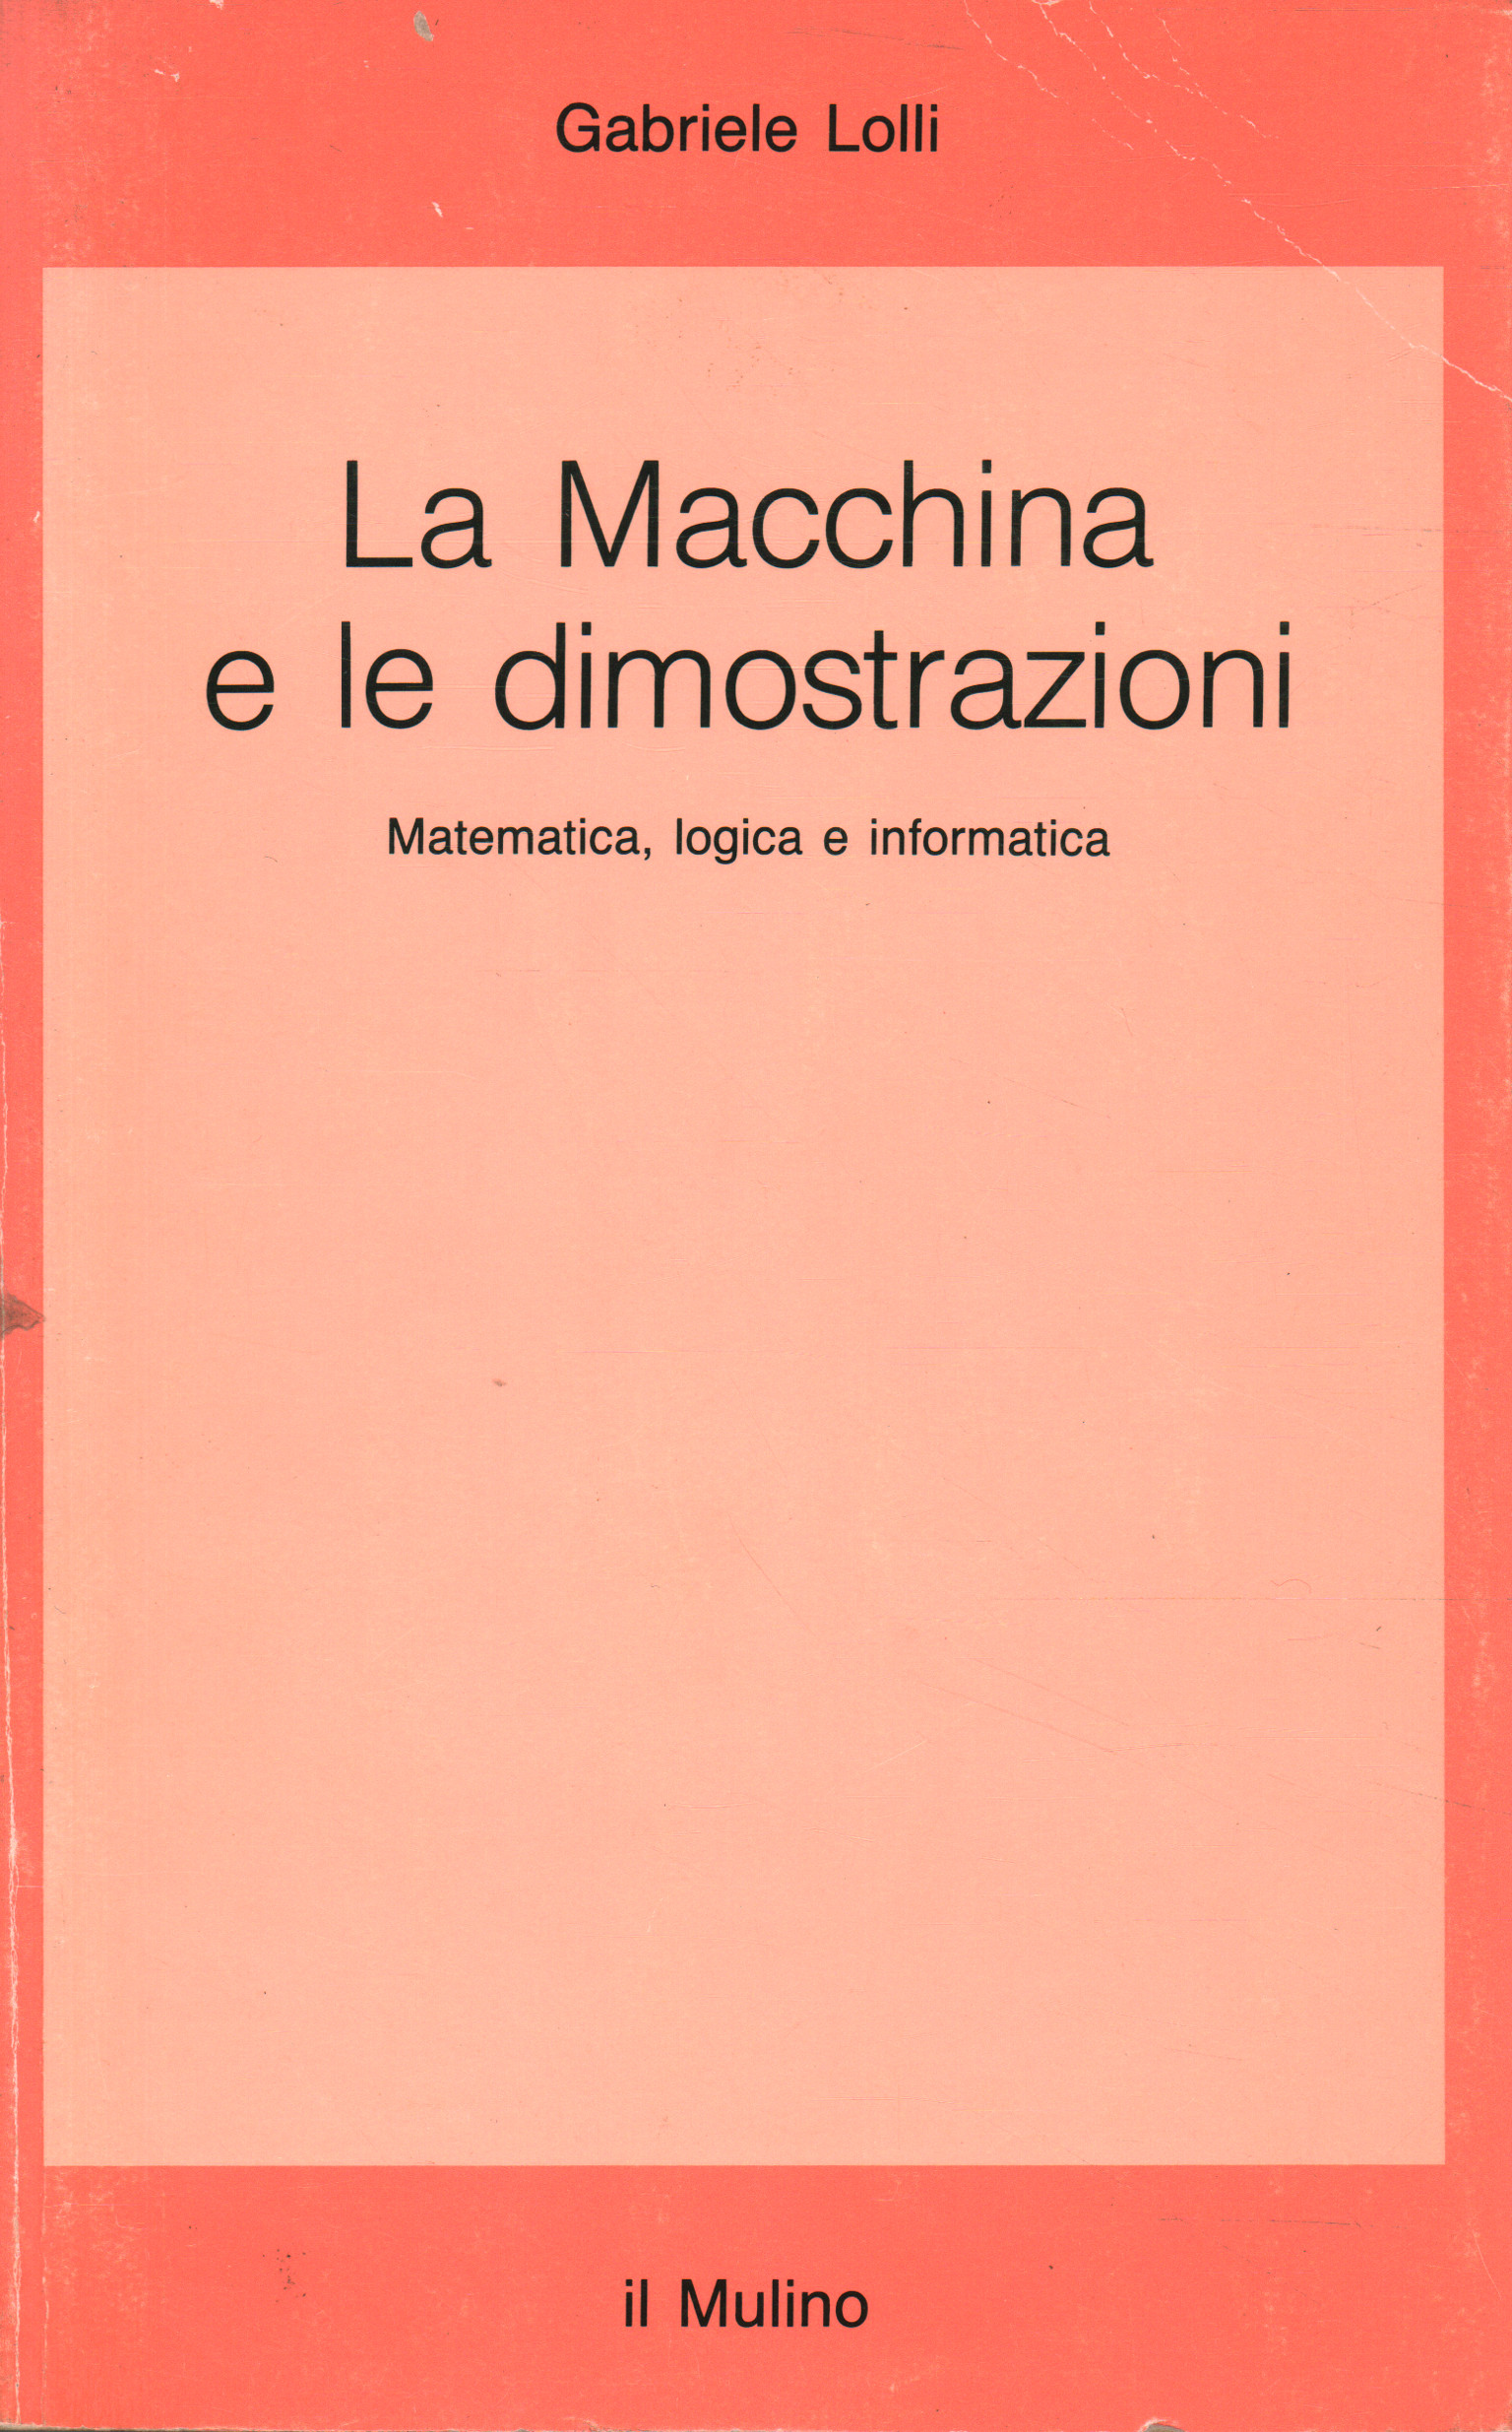 The Machine and the demonstrations